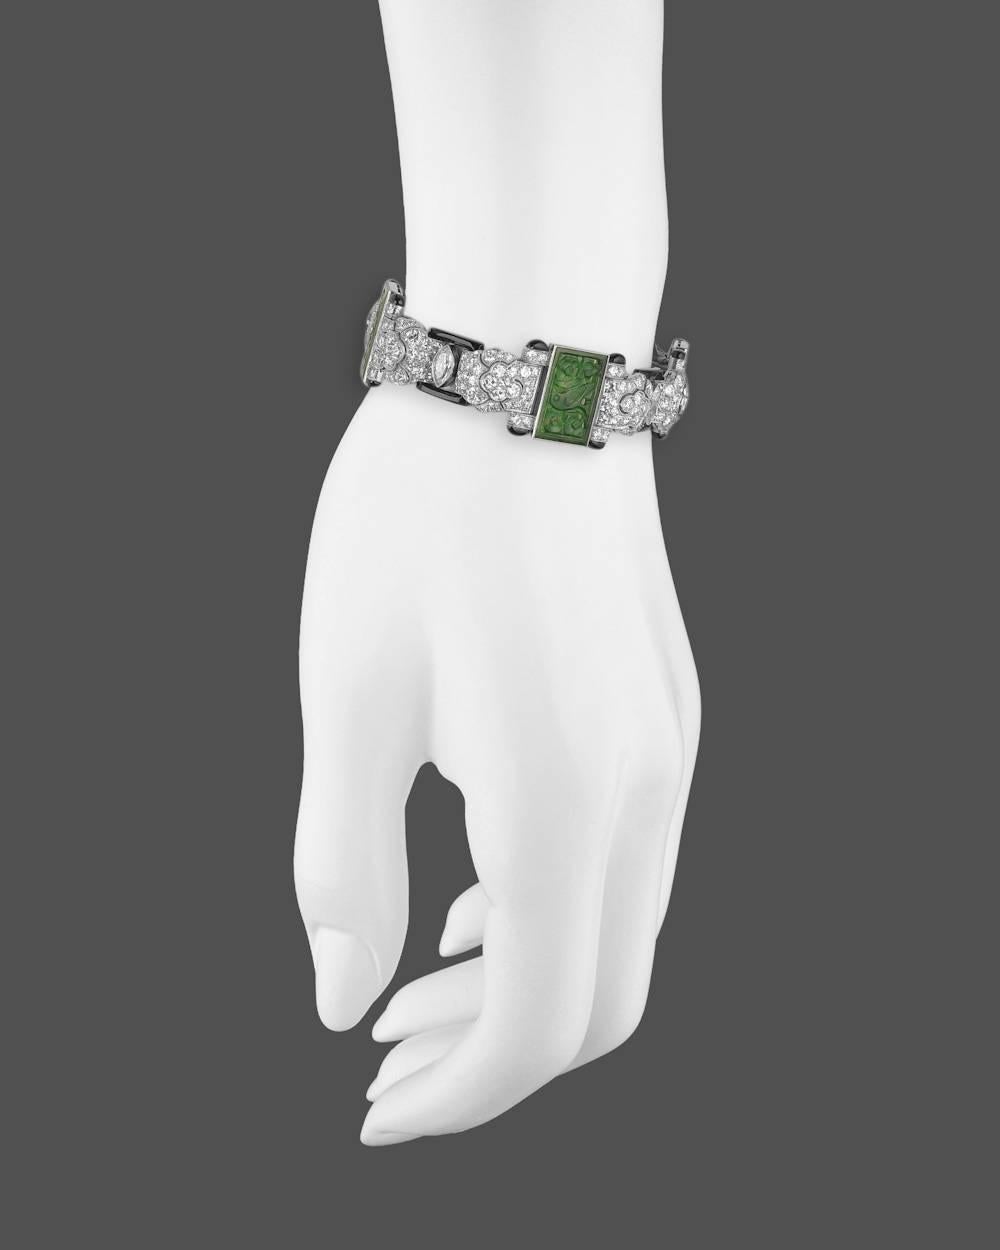 Very fine Art Deco gem-set panel bracelet, showcasing four pierced jadeite plaques framed by four larger marquise-shaped diamonds weighing approximately 1.20 total carats and 256-round diamonds weighing approximately 7.70 total carats, with black